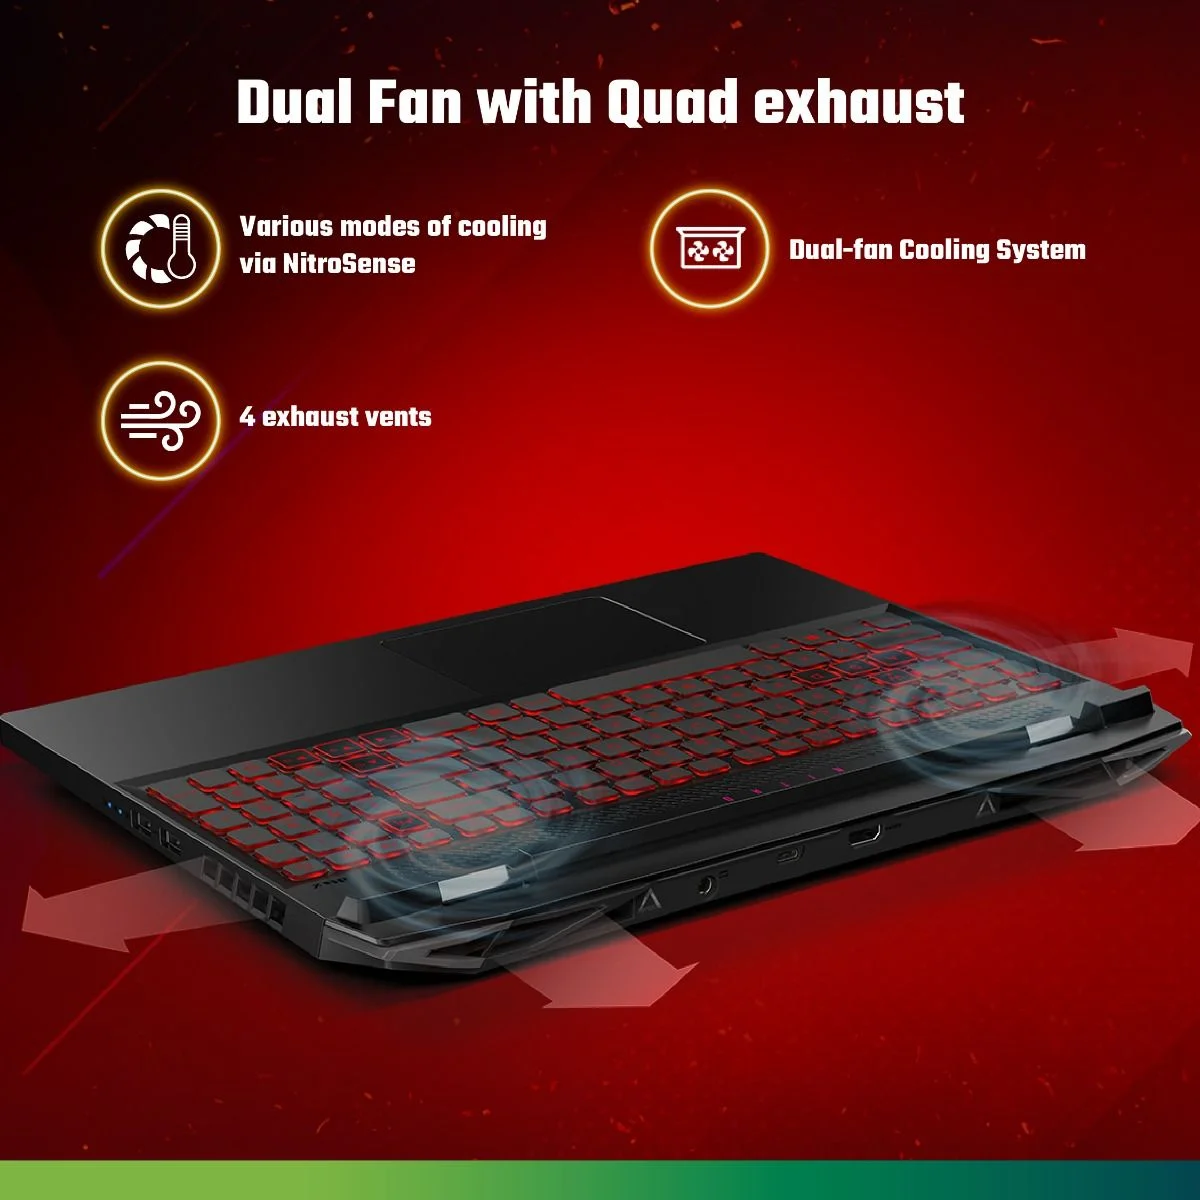 ACER NITRO 5 AMD Chilled to Perfection The newly refined chassis comes with a few extra tricks up its sleeve in the form of dual- fan cooling, dual-intakes (top and bottom), and a quad-exhaust port design. For extra control, pop open the NitroSense utility app and take command over fan speeds, lighting, and more.